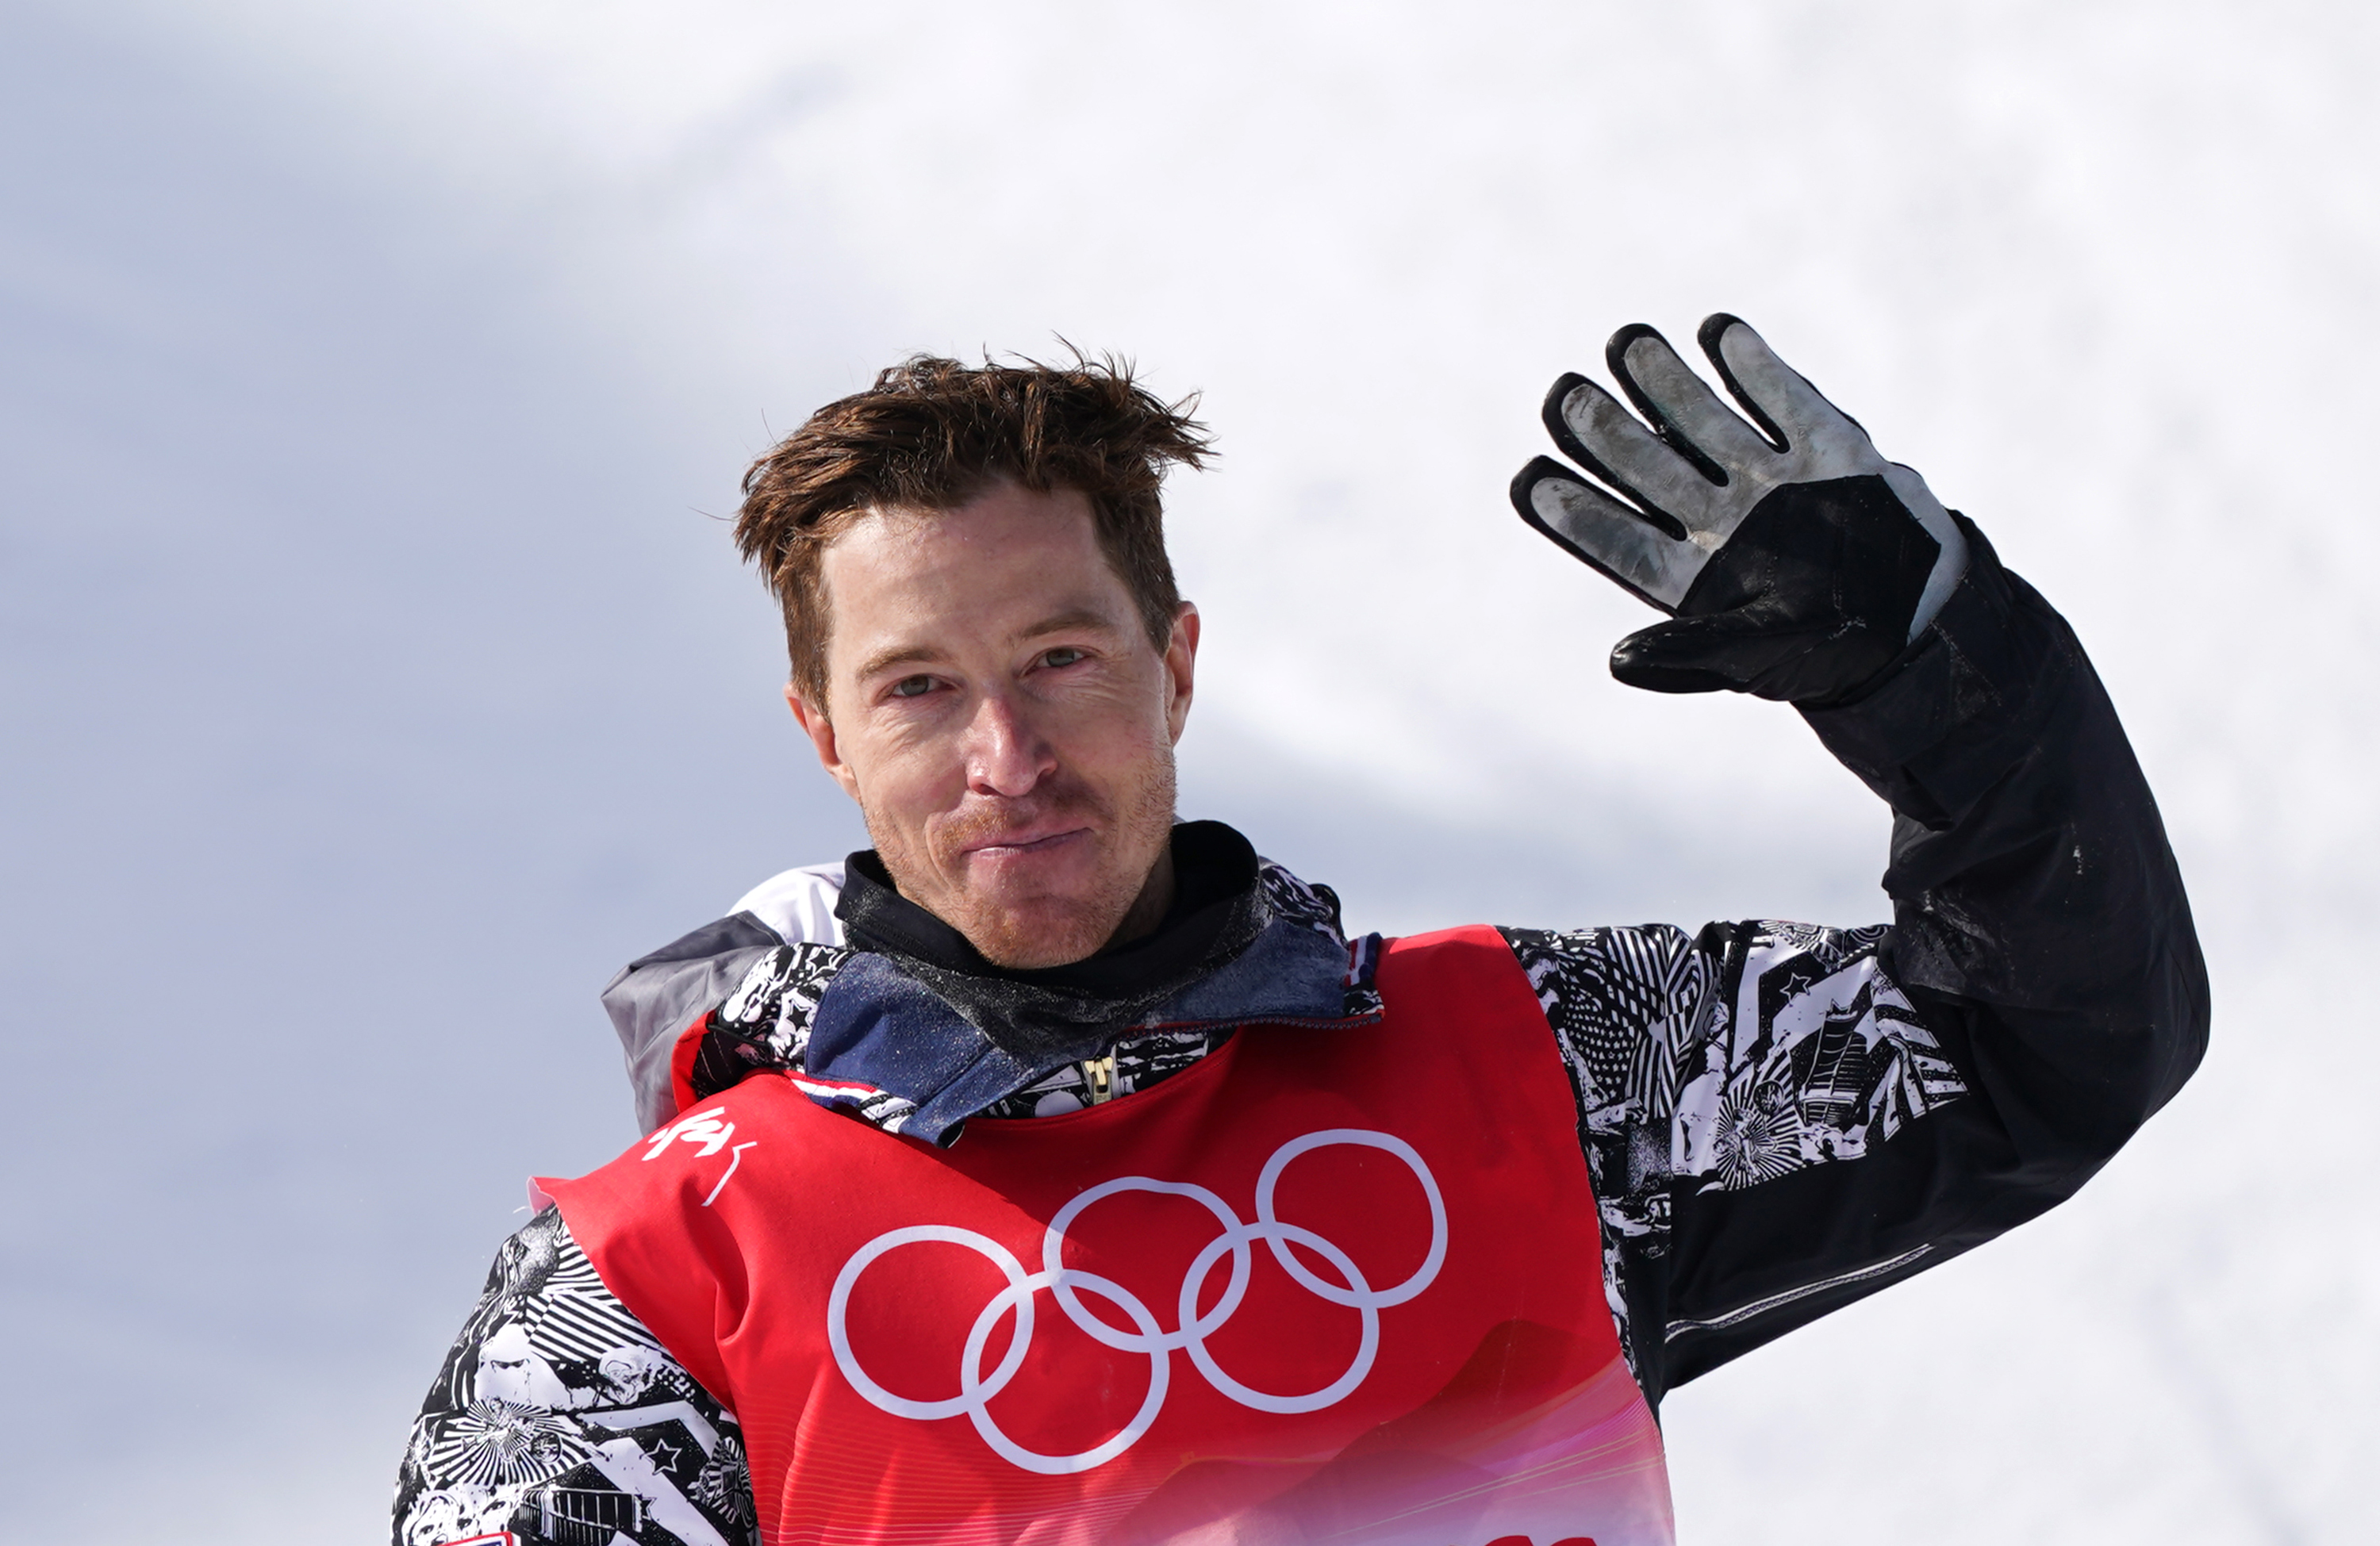 Team USA's Shaun White, 35, finished fourth in the men's snowboard halfpipe final on Friday.